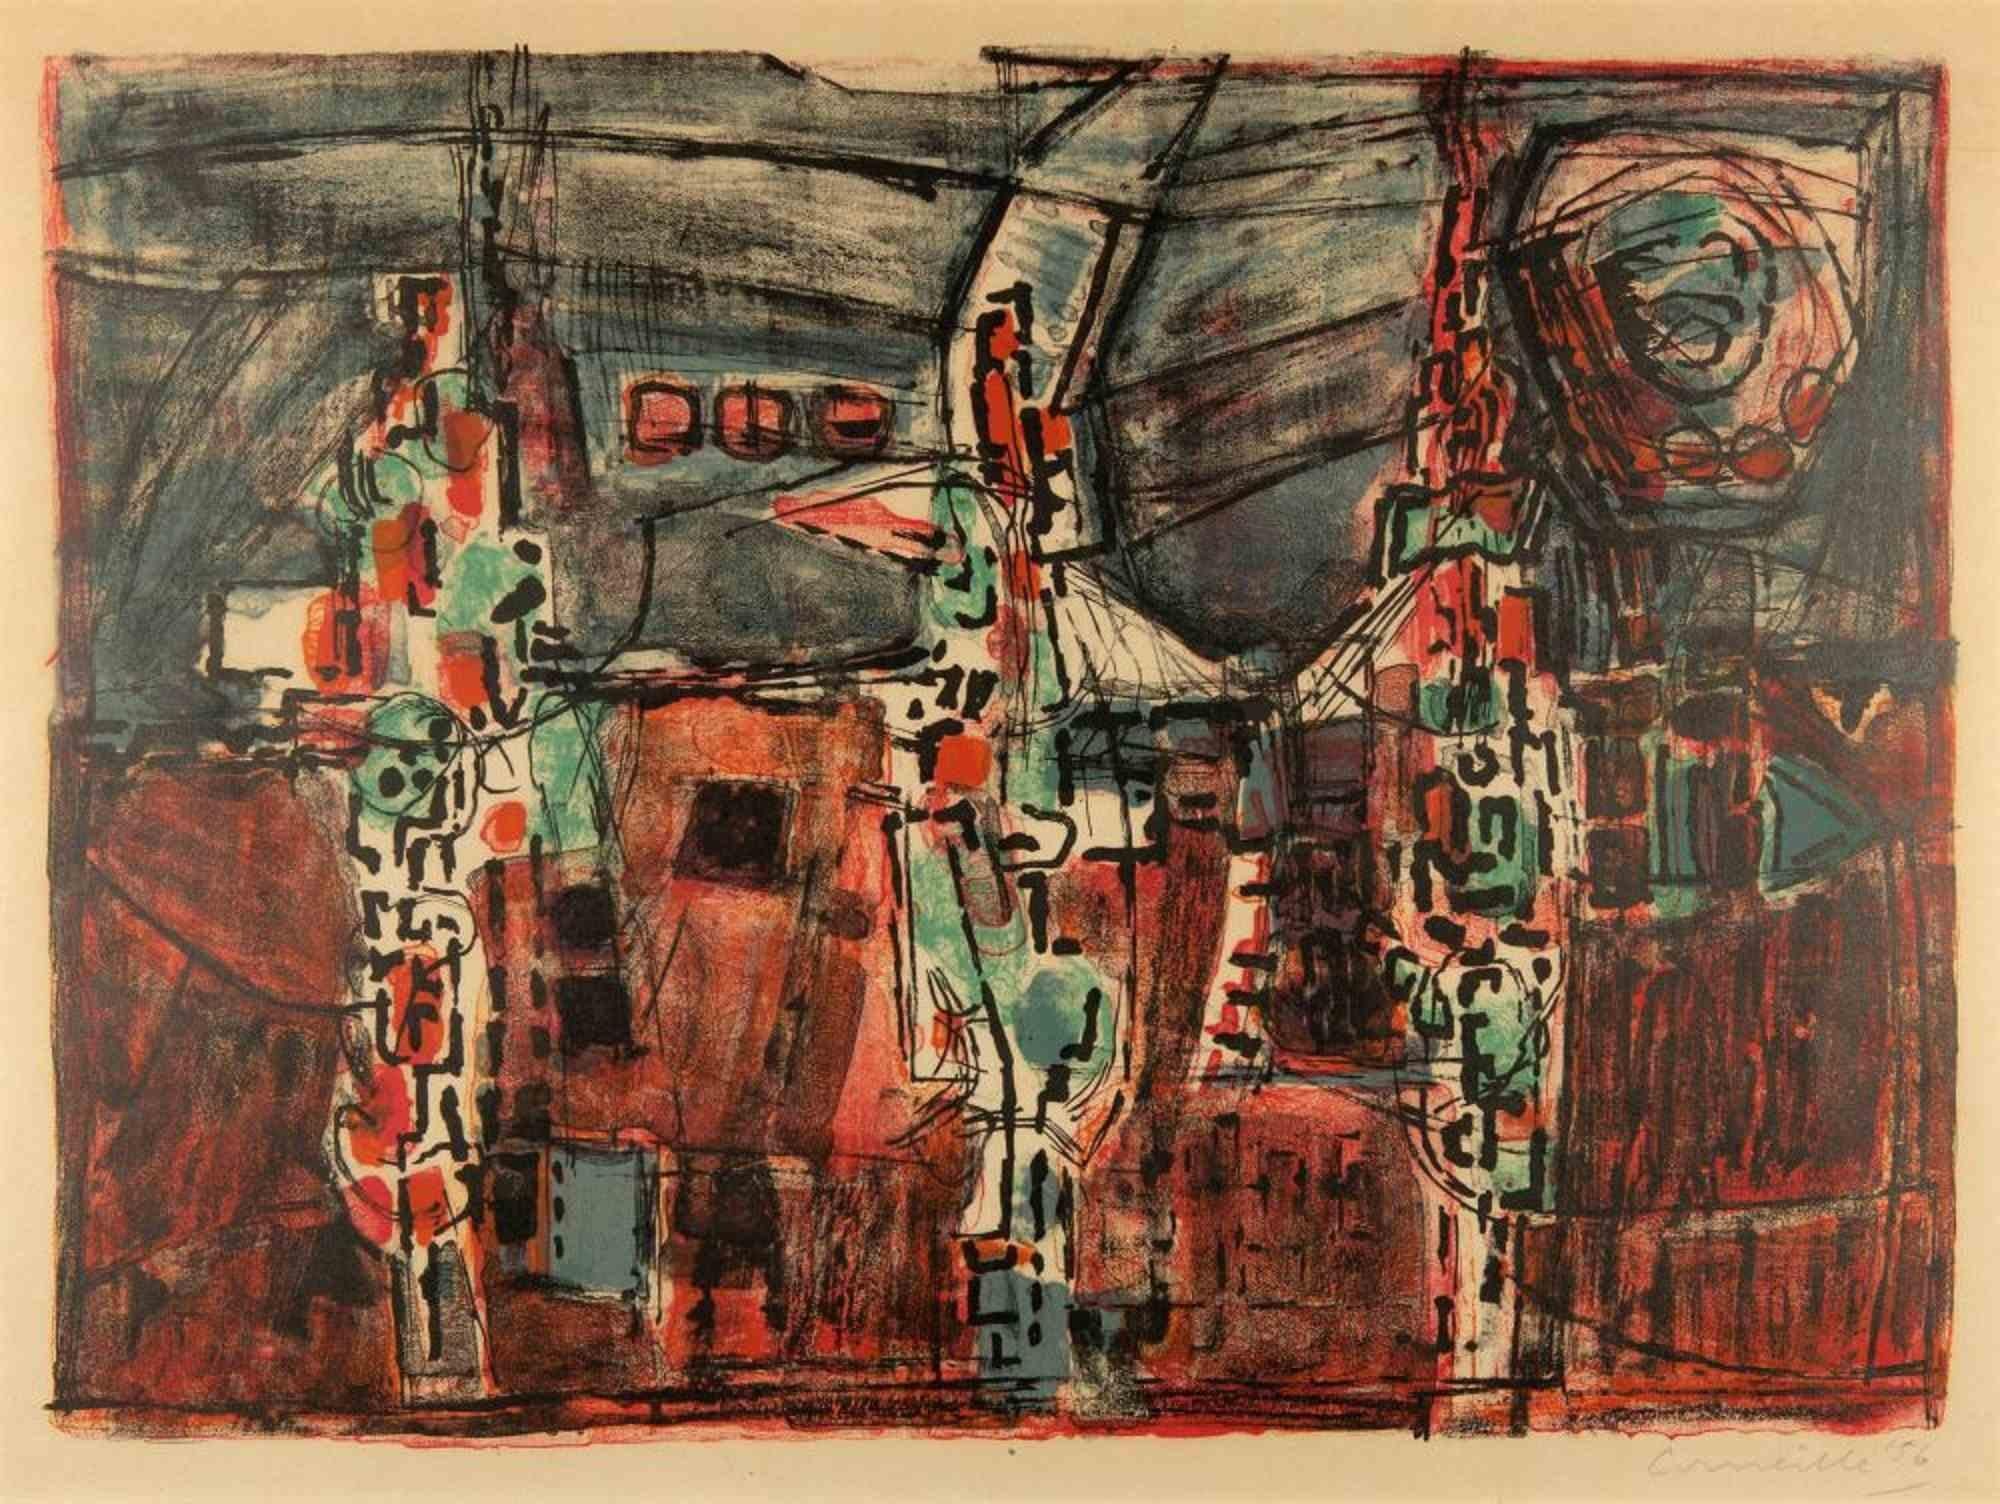 Piège  - Original Lithograph by Guillaume Corneille - 1956